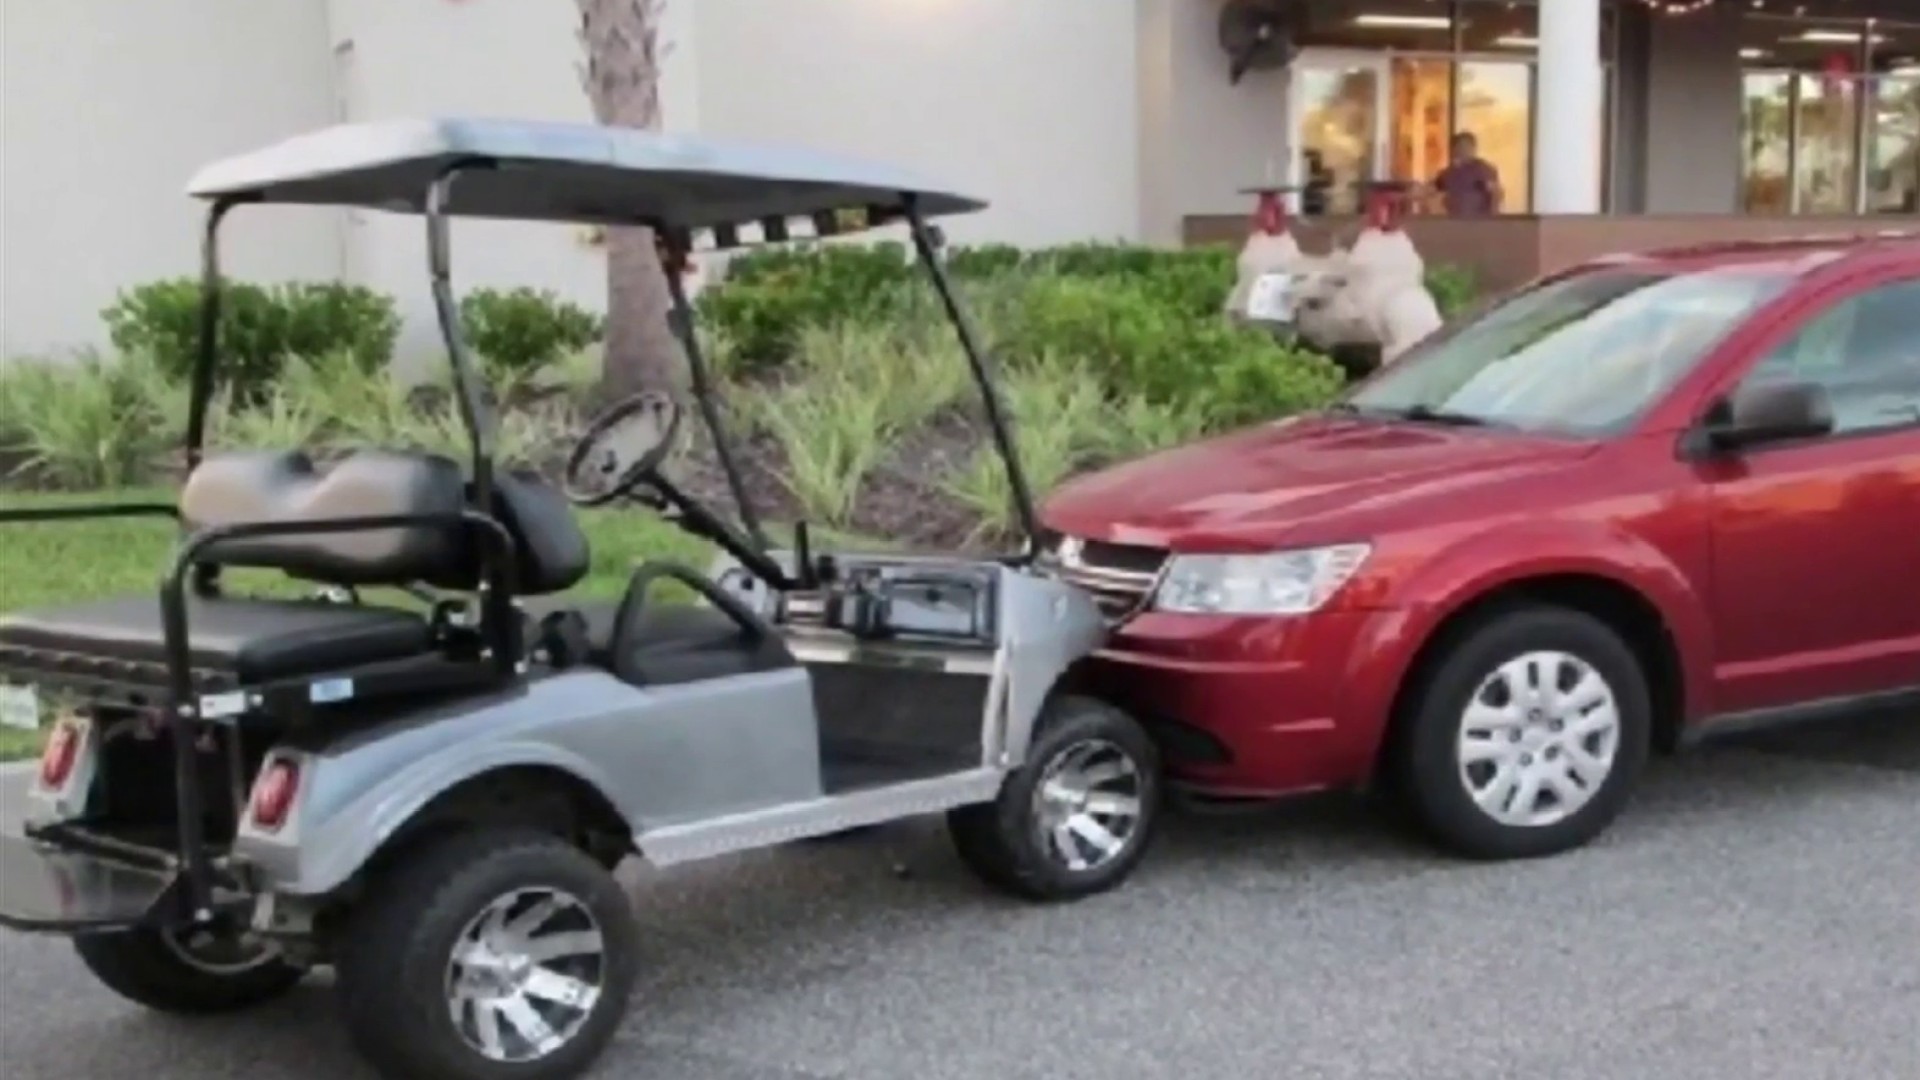 Good first step': Florida resident applauds new law raising legal age to drive  golf cart on public roads